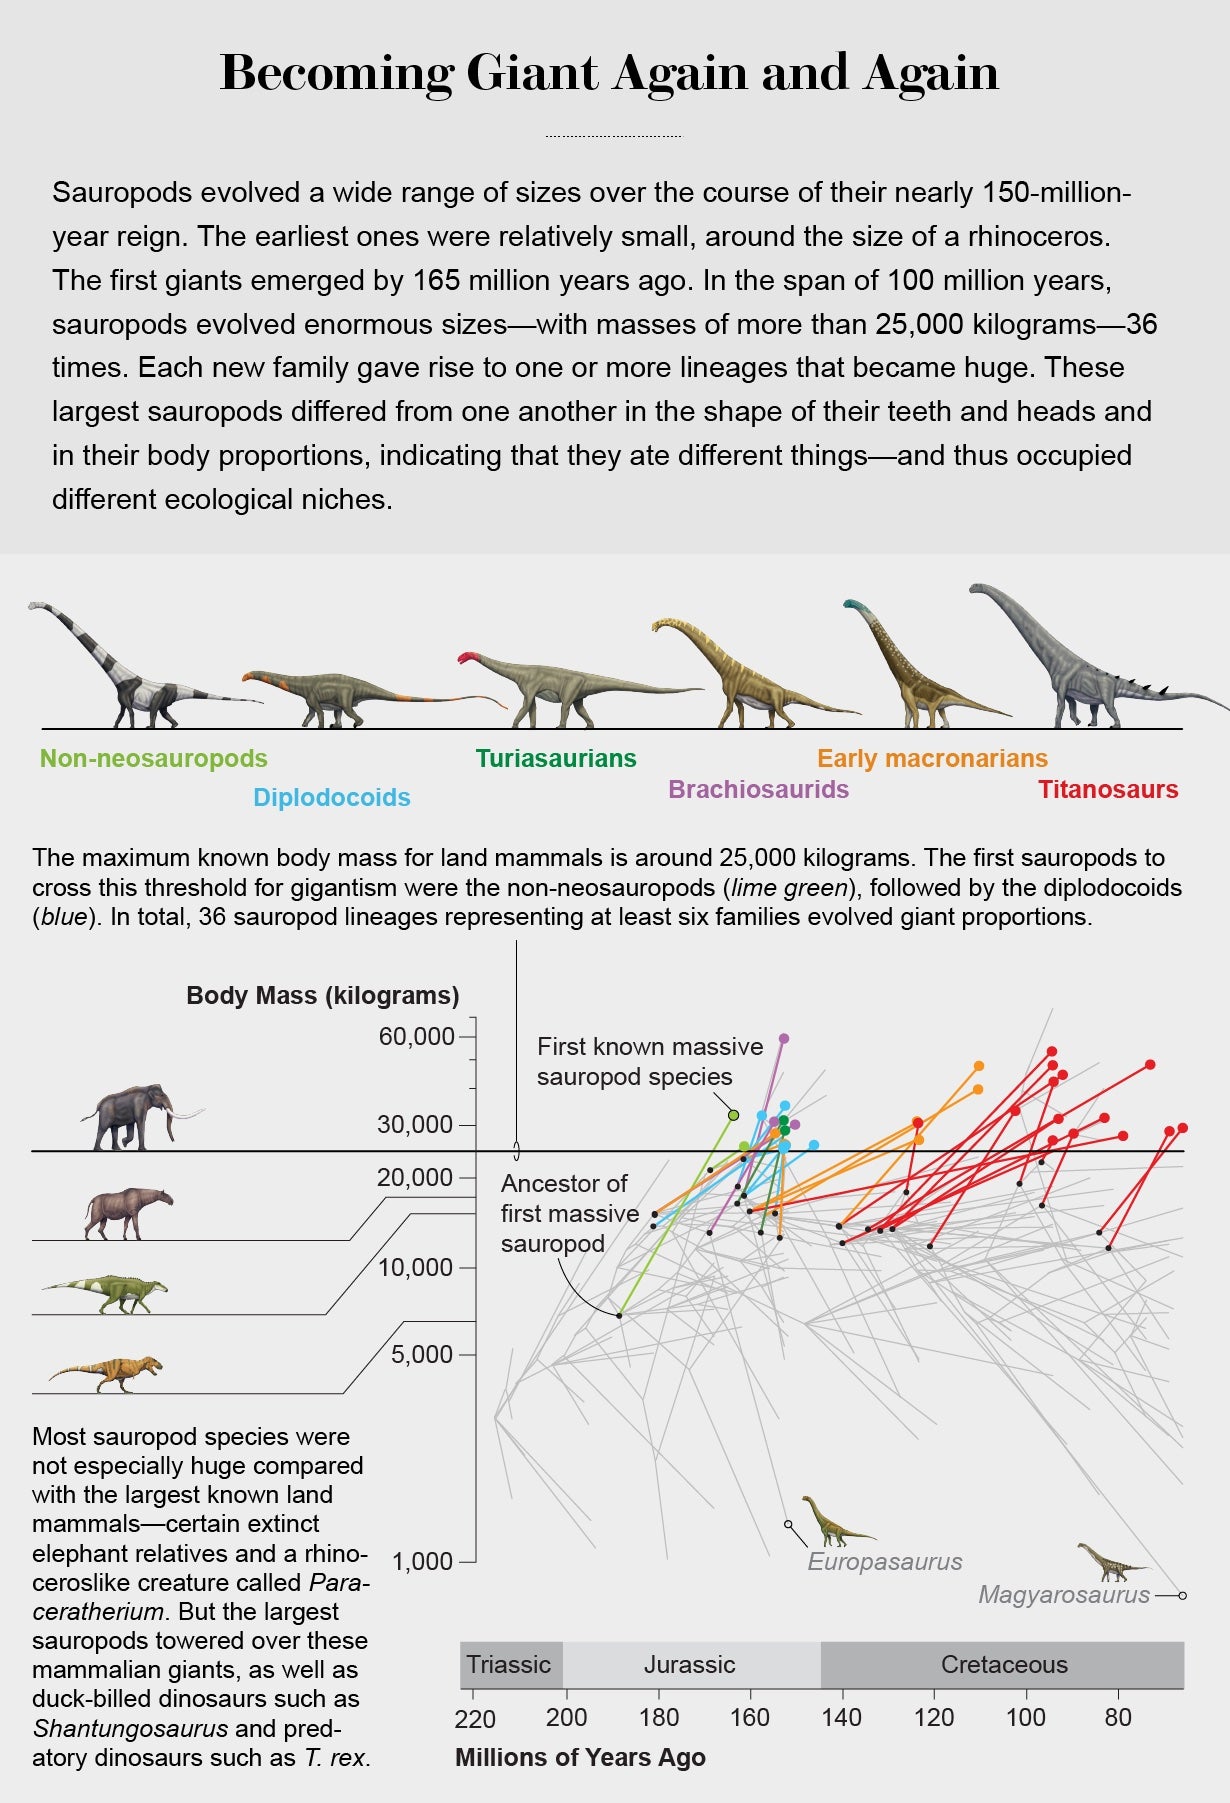 Chart plots massive sauropod species according to their body mass and how long ago they and their respective ancestors evolved, highlighting 36 separate lineages that grew to more than 25,000 kg.